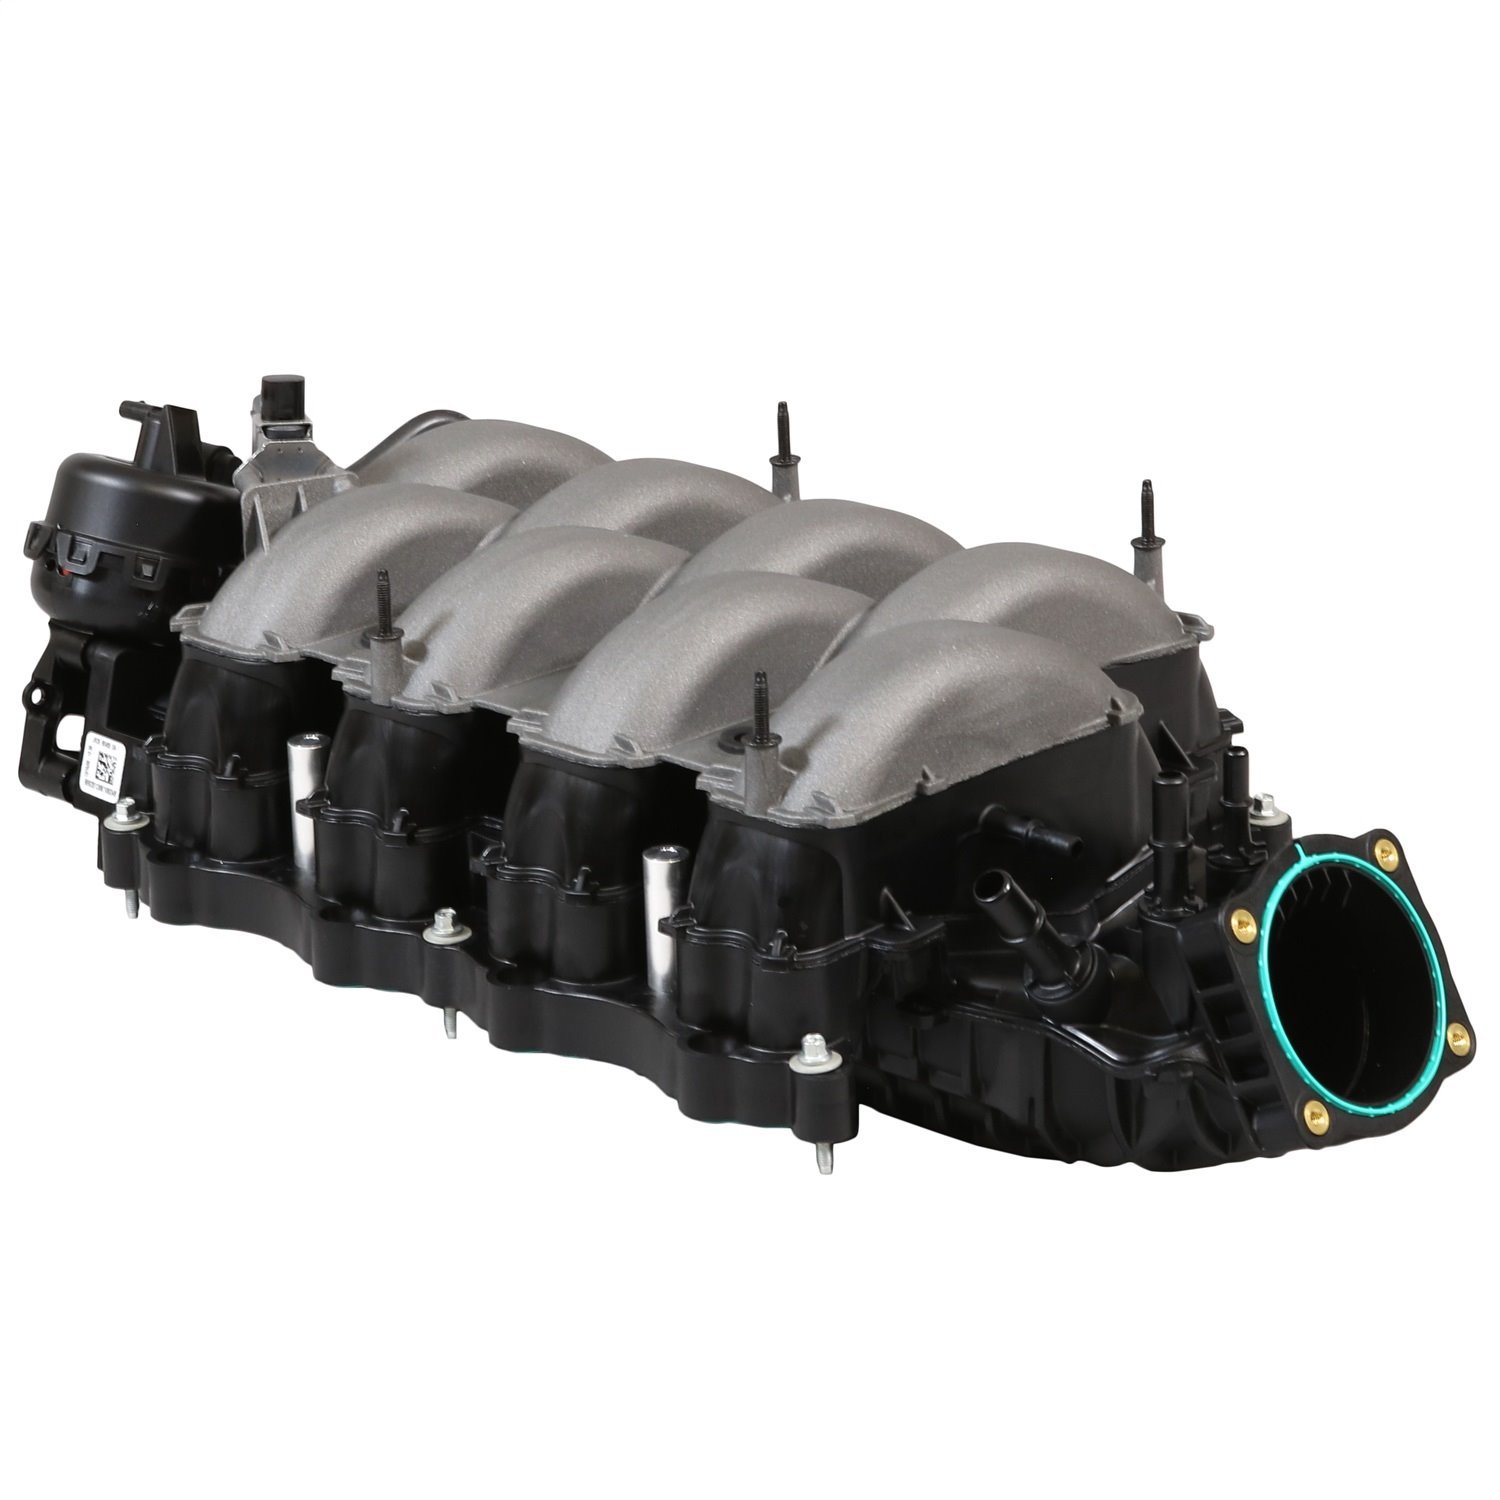 M-9424-M50C Intake Manifold for Select Mustang GT, 2011-2017 5.0L Coyote Engines